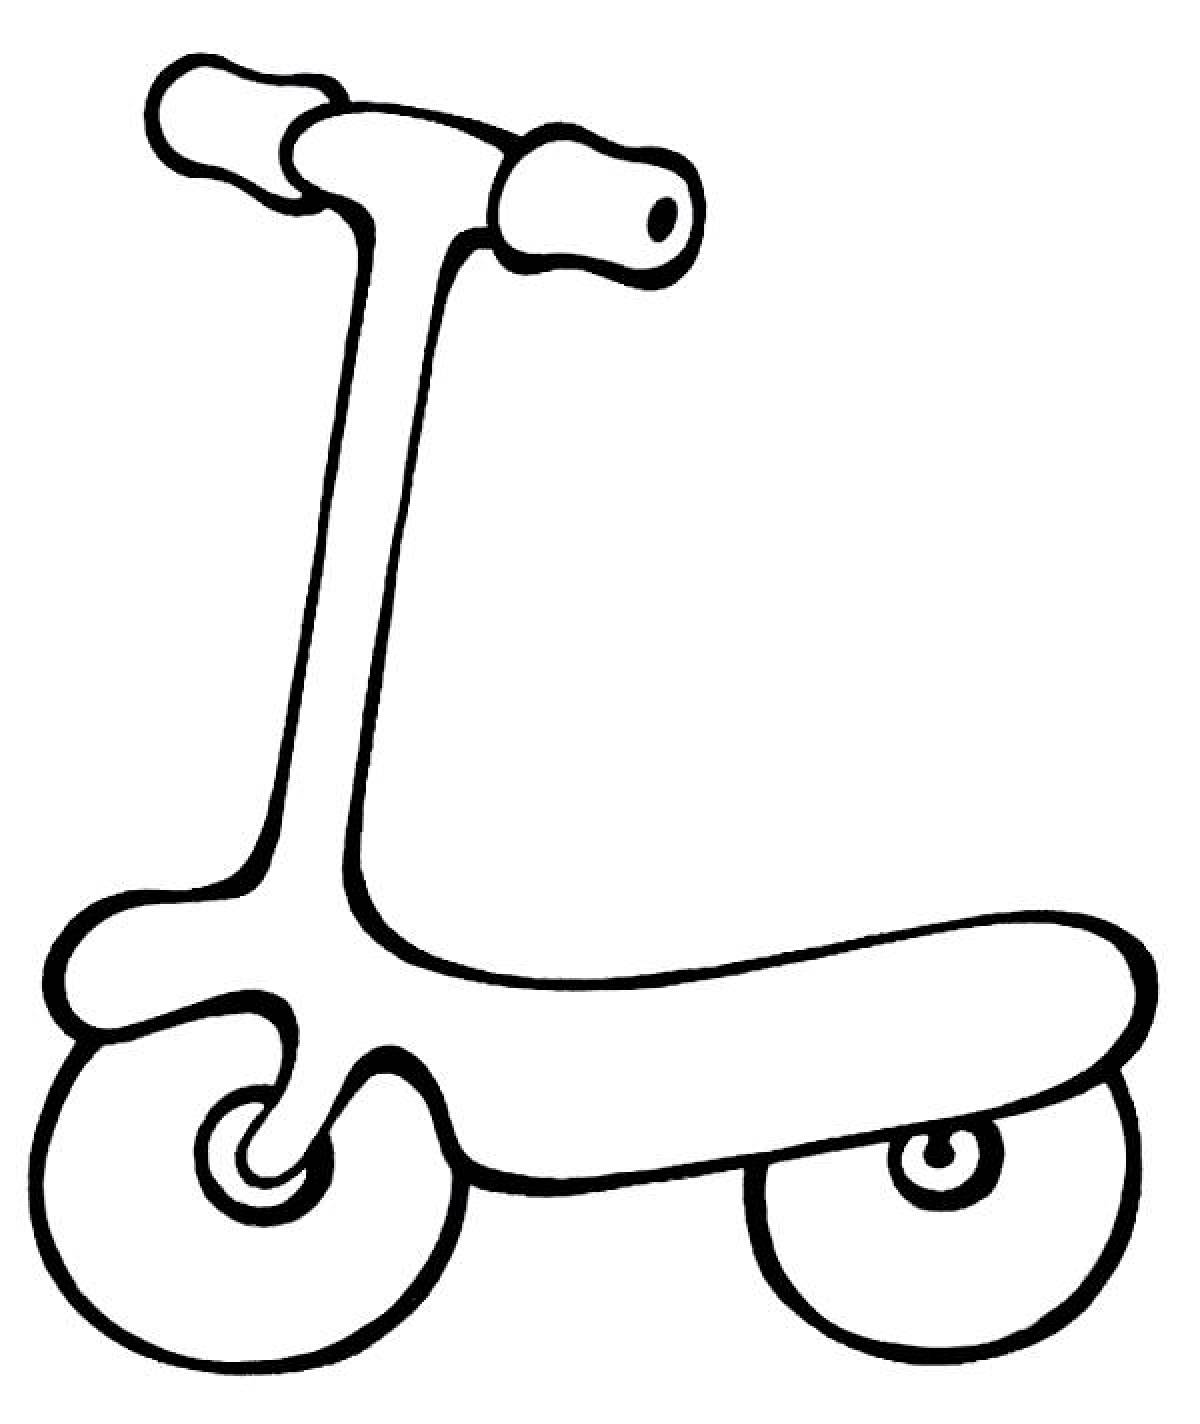 Scooter coloring page